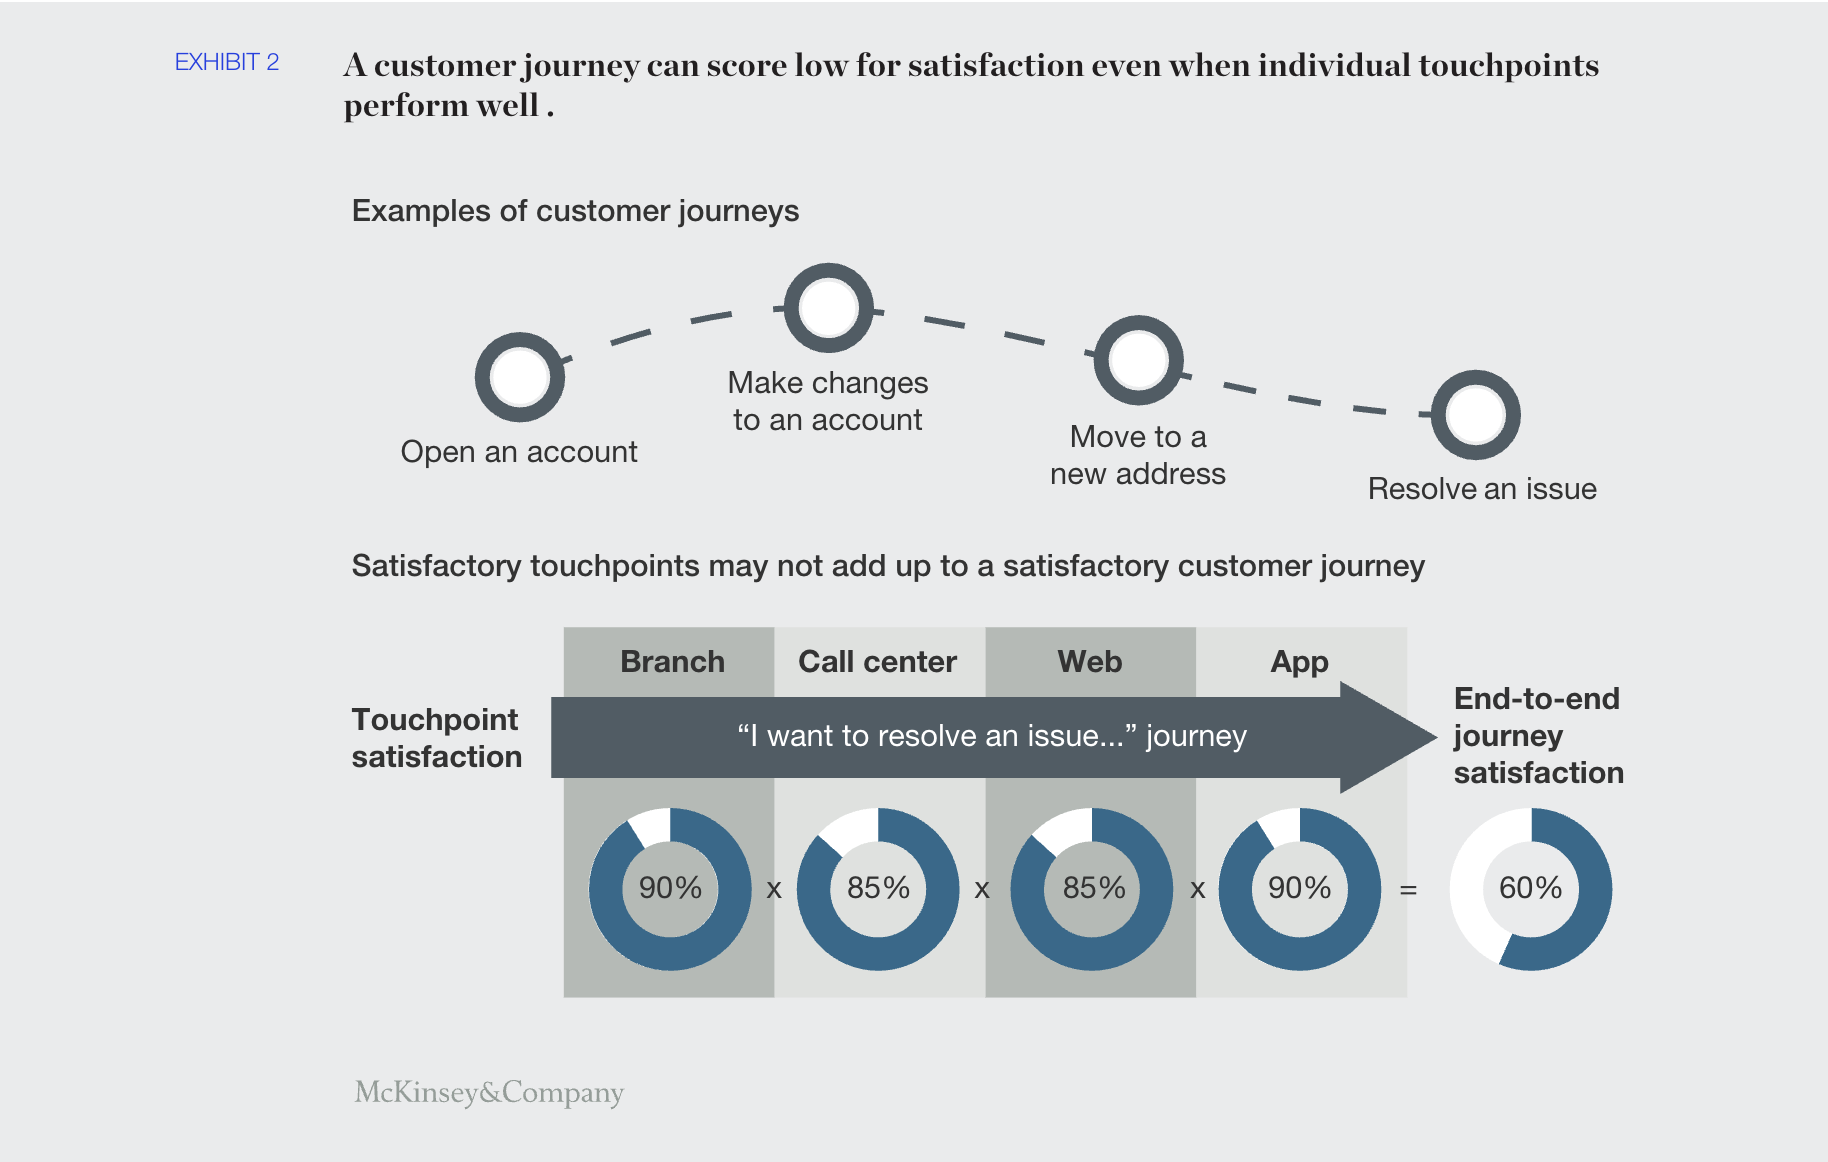 An infographic titled "A customer journey can score low for satisfaction even when individual touchpoints perform well," including examples of customer journey stages and a satisfaction breakdown by touchpoints.